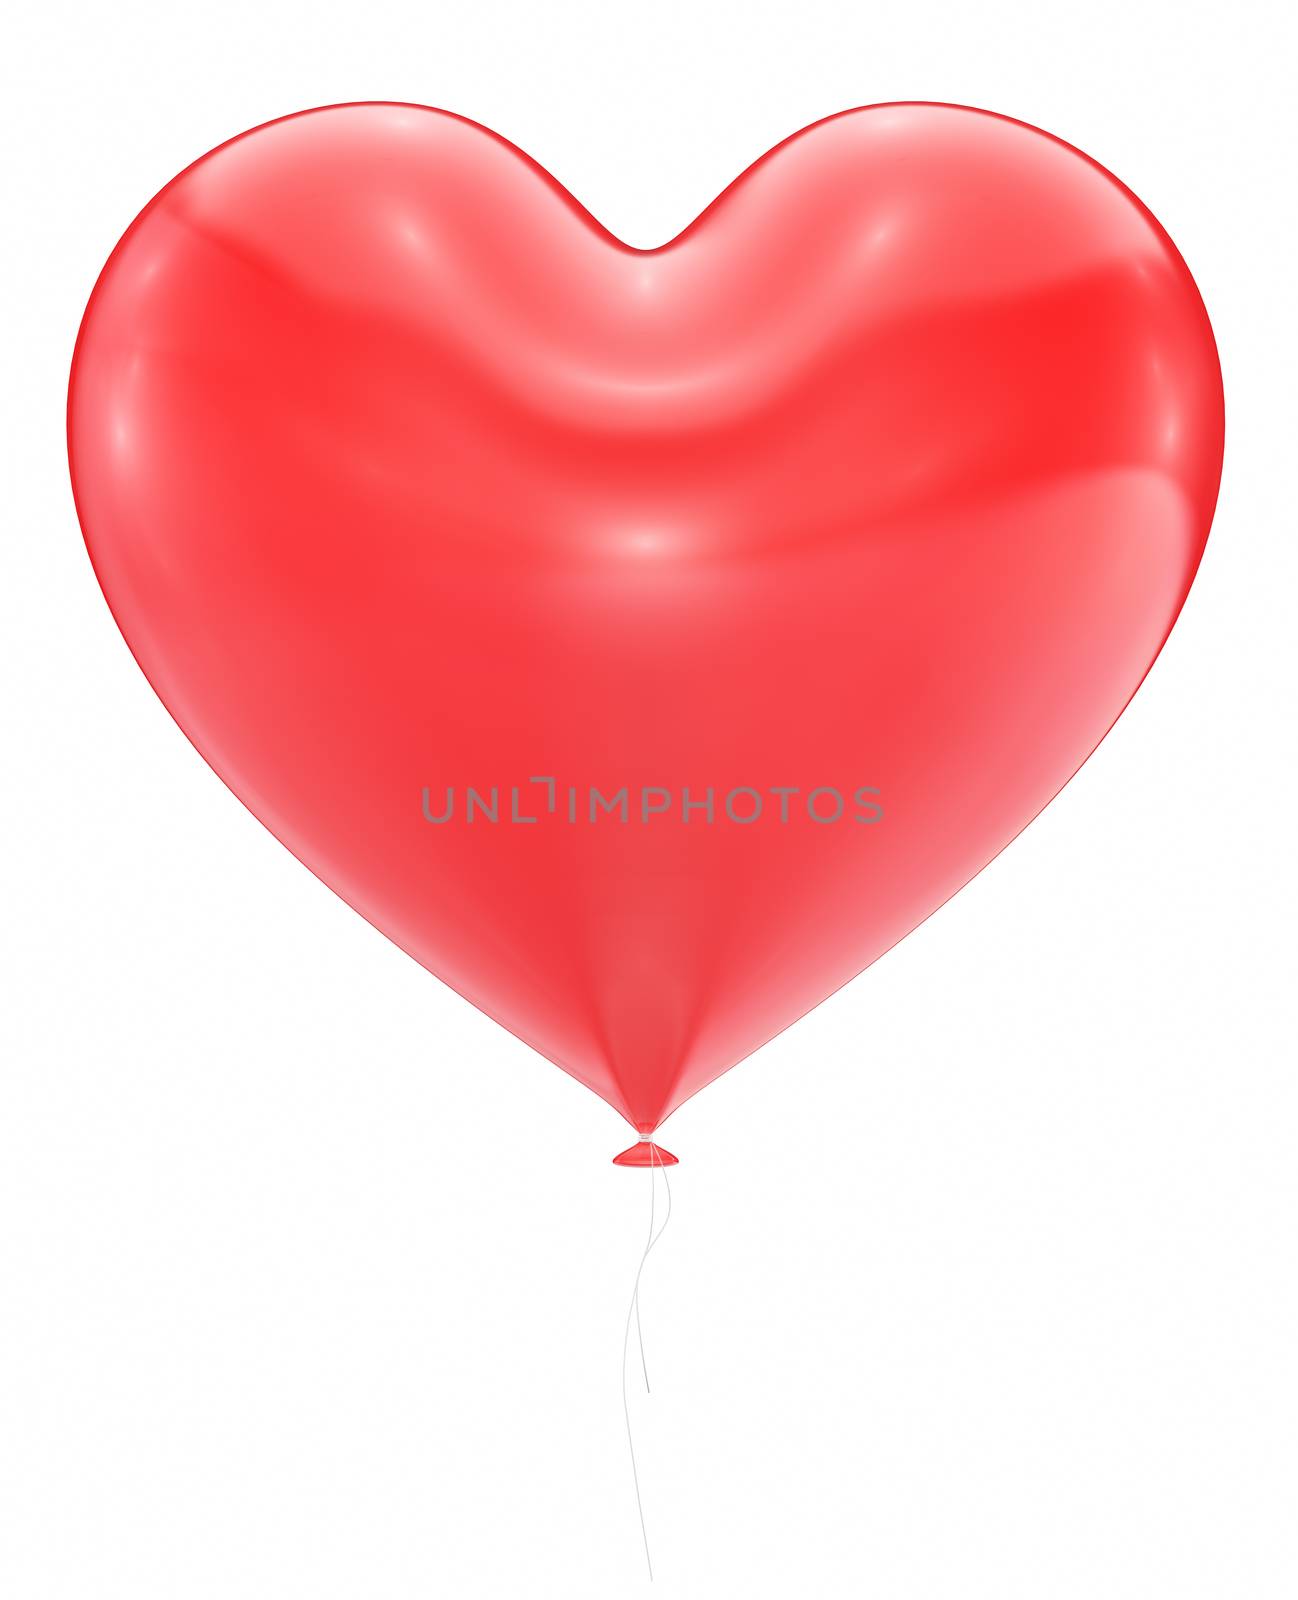 Big Red Heart Balloon  by manaemedia